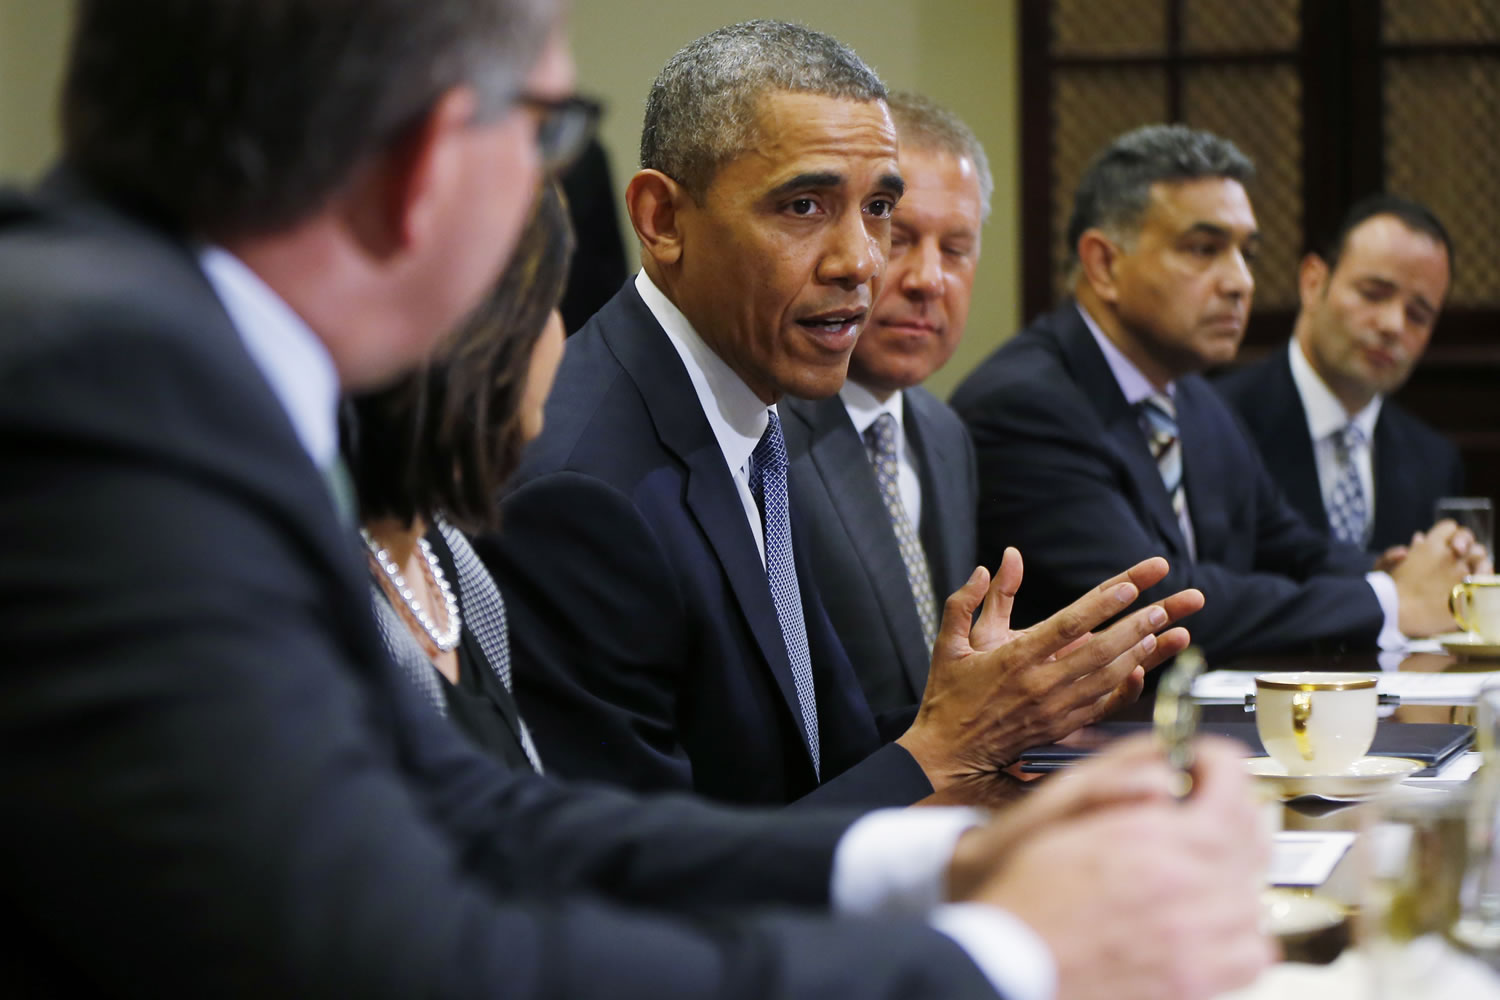 President Barack Obama meets with business leaders about creating and investing in jobs in the U.S. Tuesday, in the Roosevelt Room of the White House in Washington. From left are: Carsten Spohr, chairman and CEO, Deutsche Lufthansa AG; Ravila Gupta, president, Umicore USA; the president; Joe Hinrichs, executive vice president and president of the Americas, Ford Motor Company; Sanjay K.